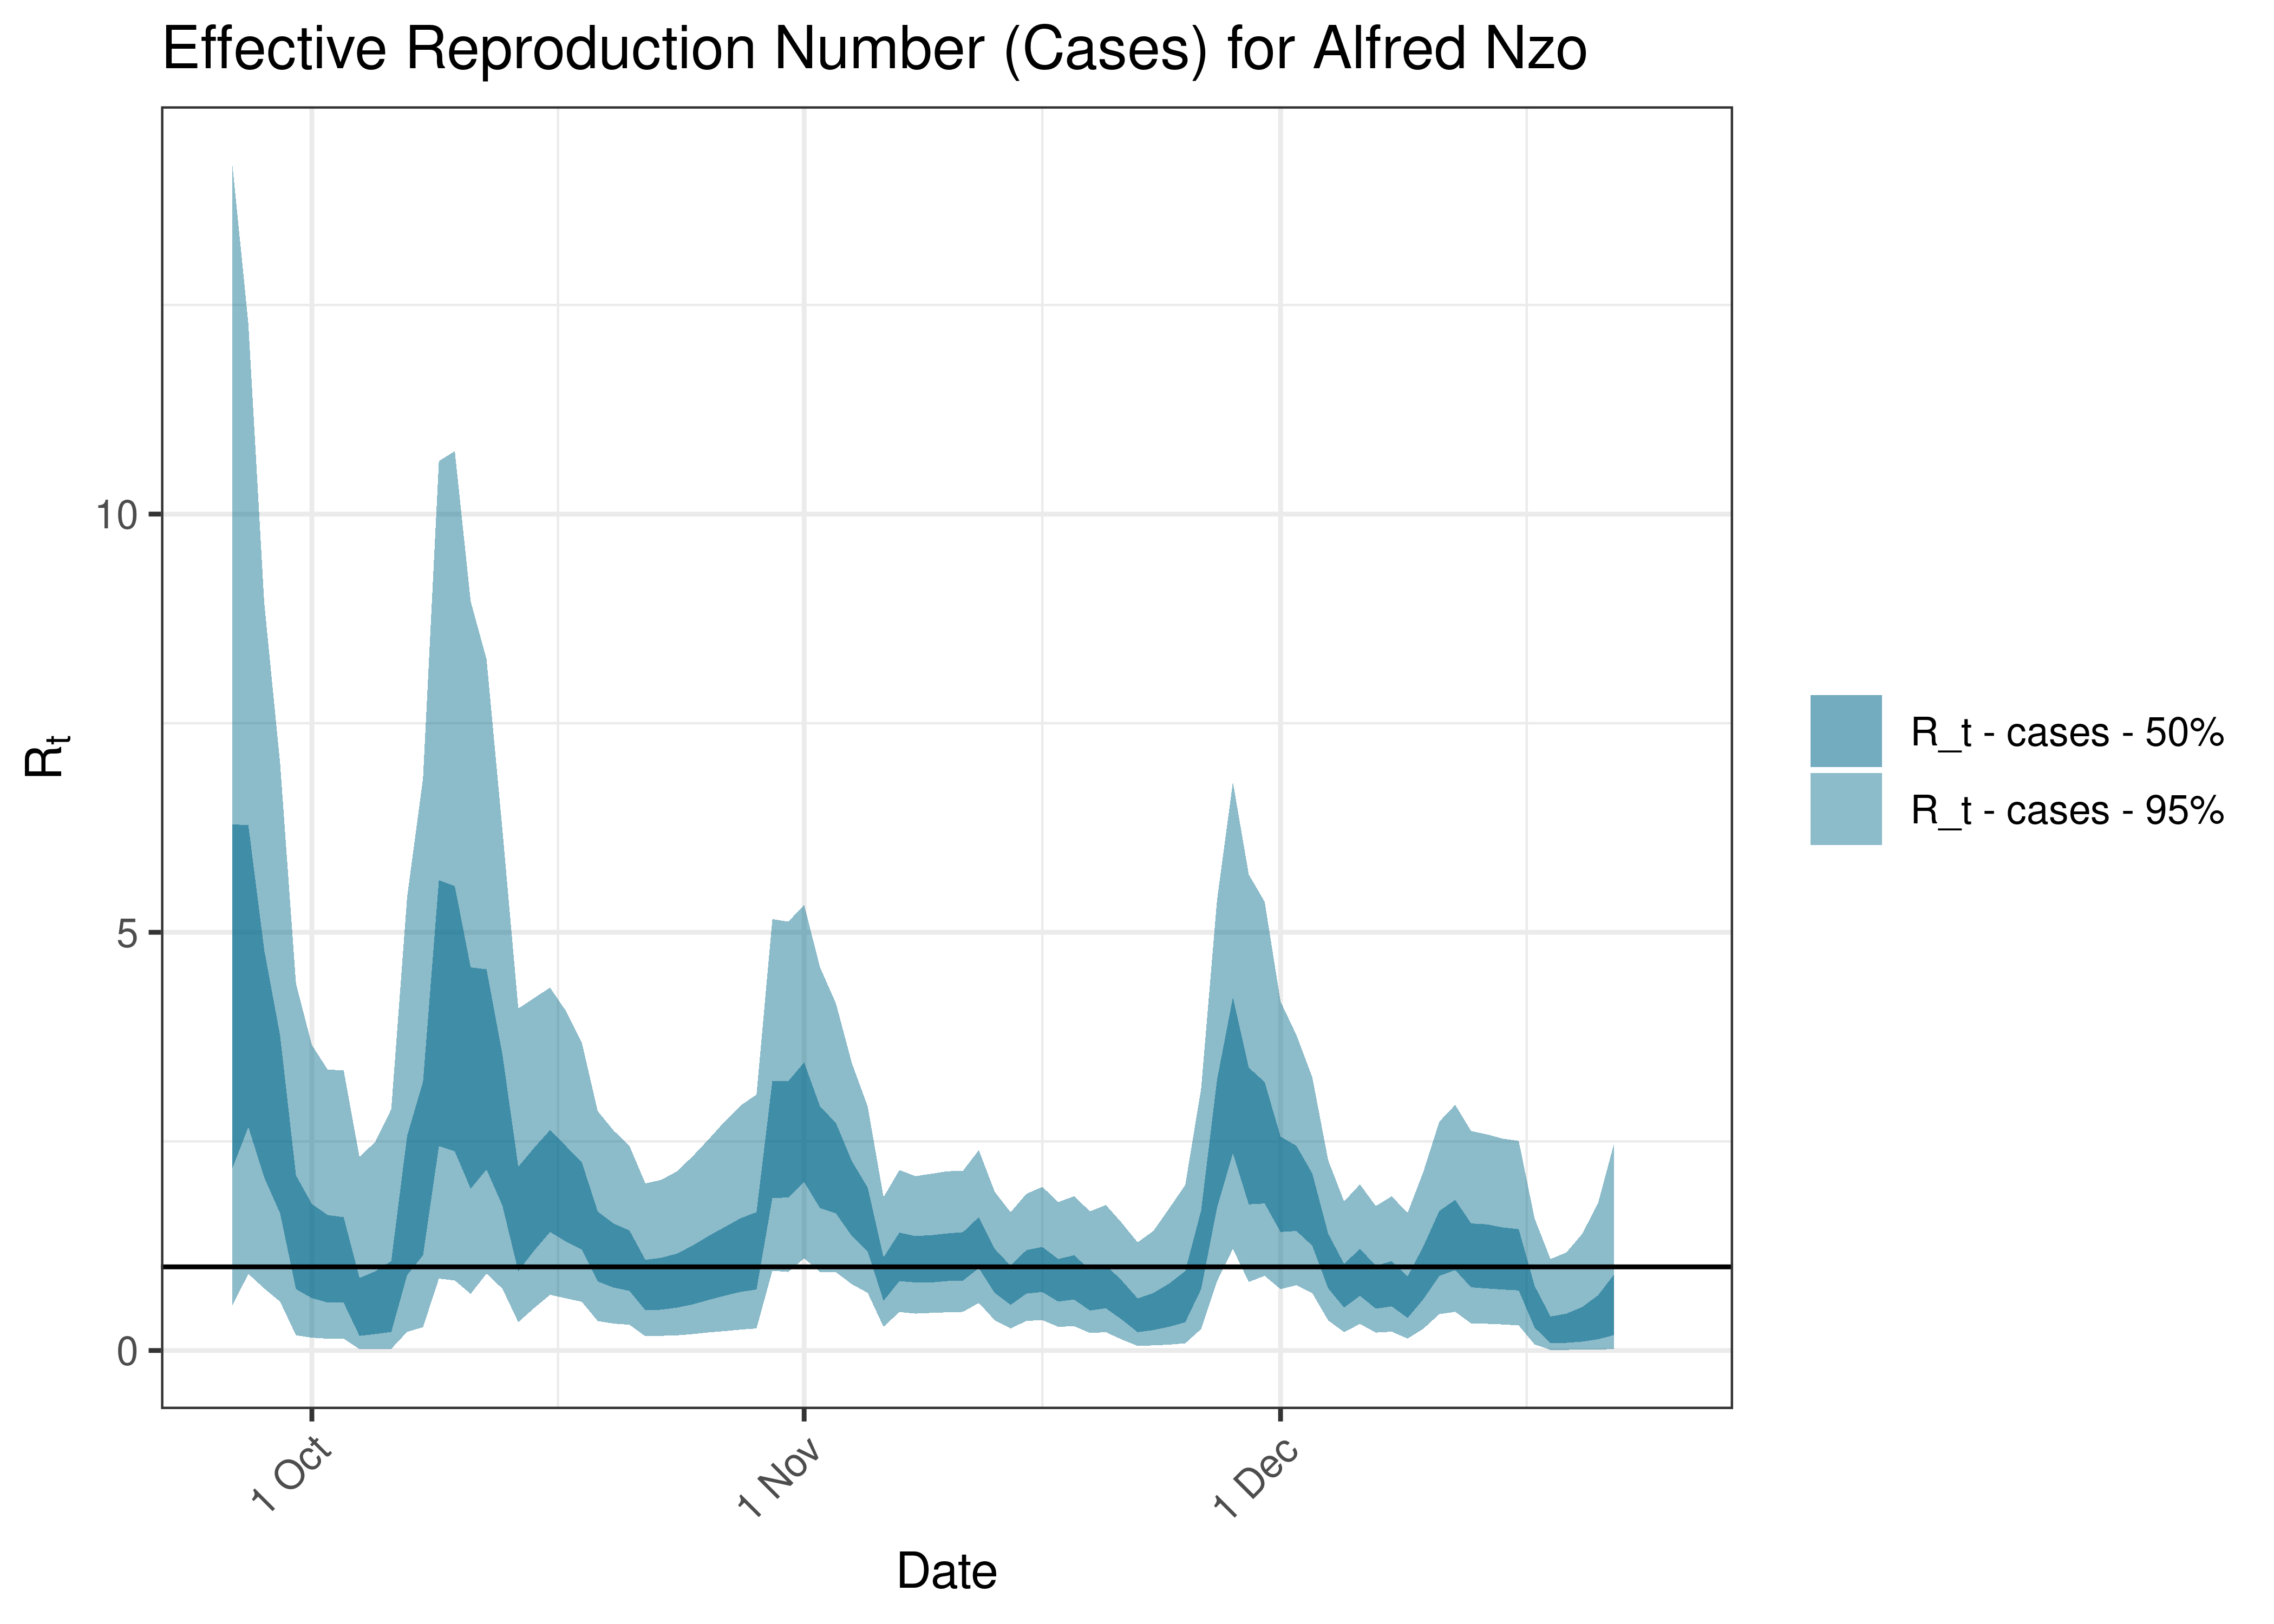 Estimated Effective Reproduction Number Based on Cases for Alfred Nzo over last 90 days